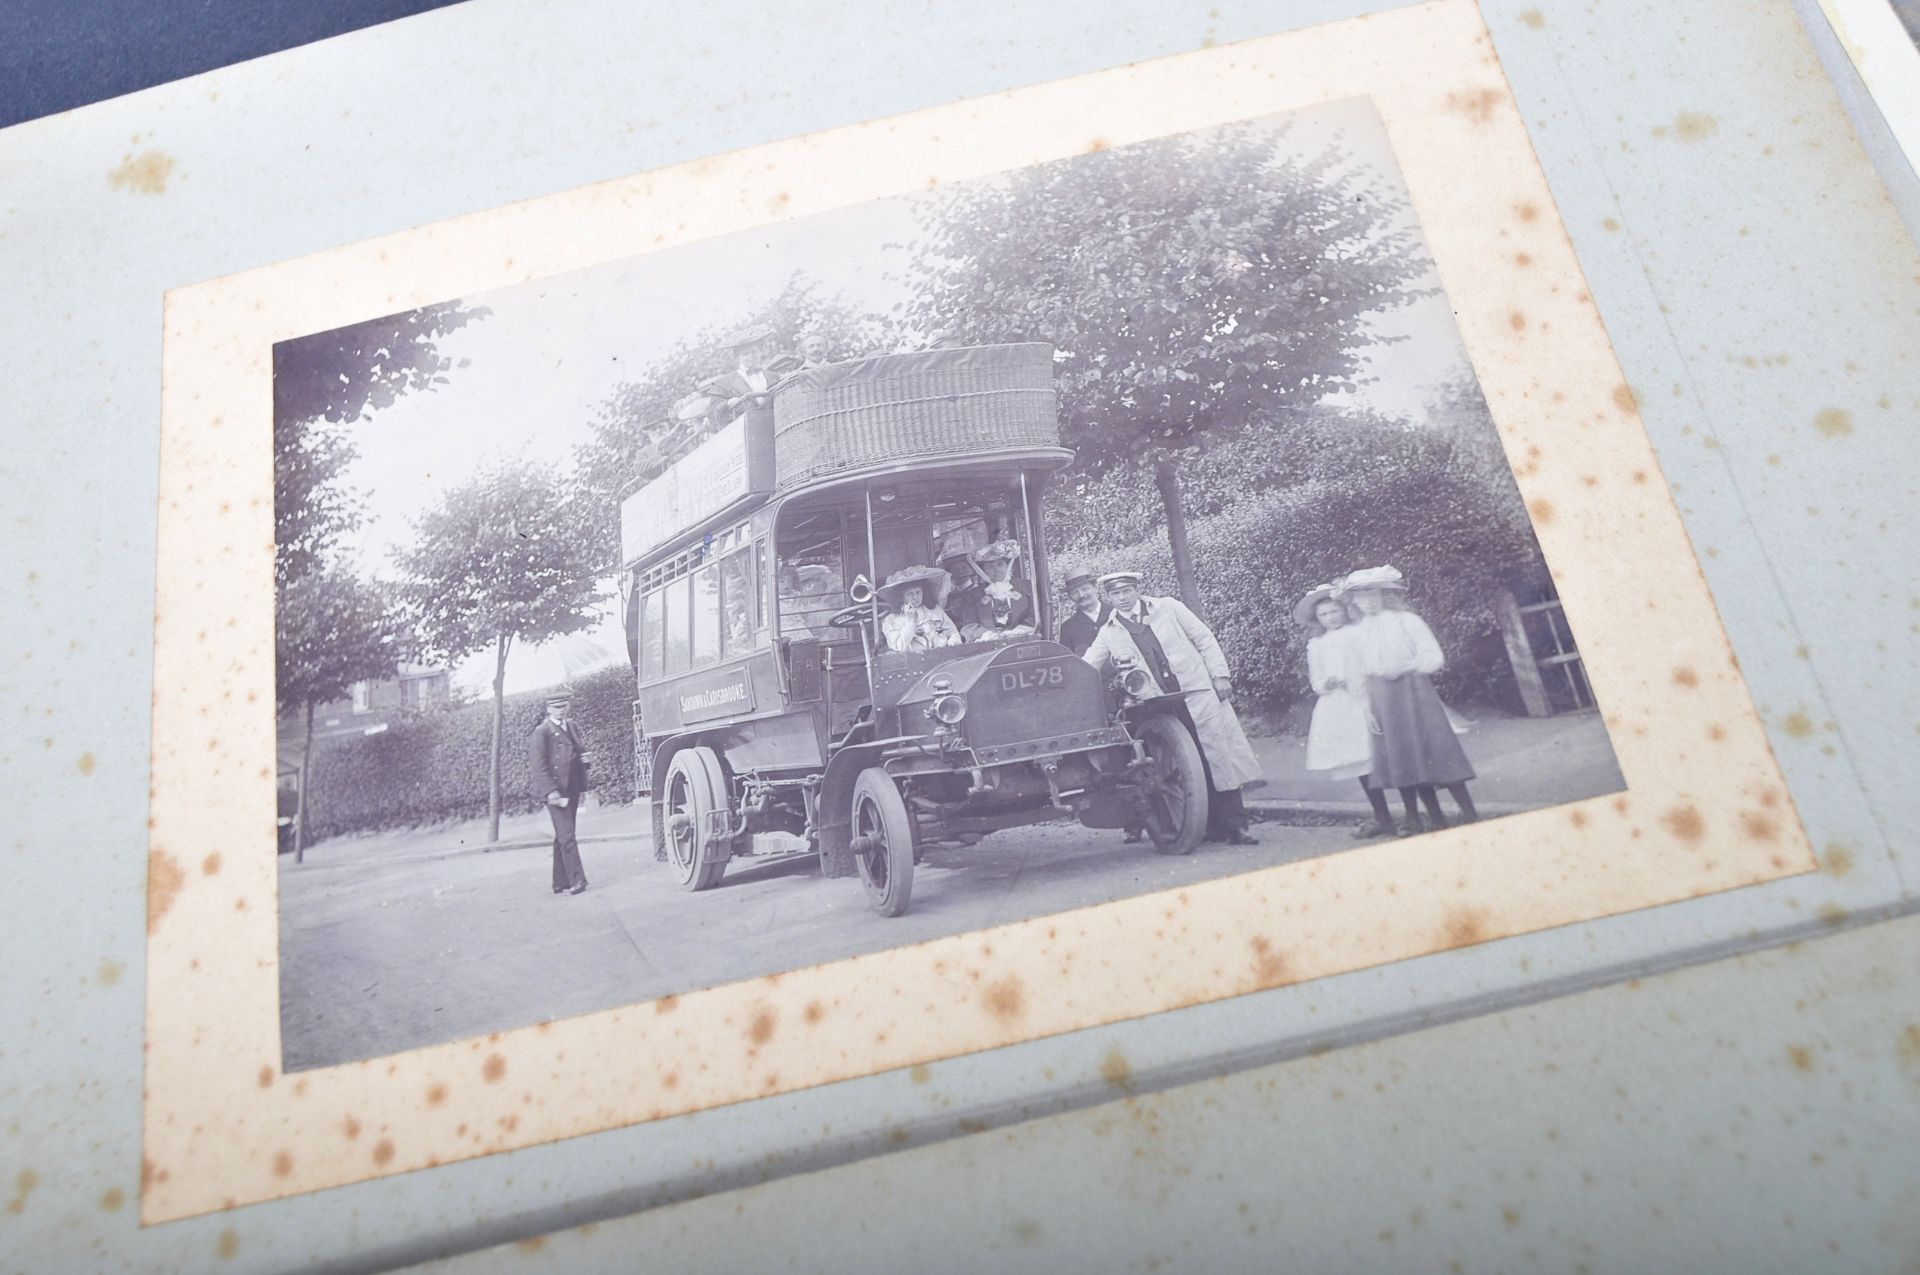 EARLY 20TH CENTURY BUS PHOTOGRAPHS - ISLE OF WIGHT - Image 2 of 7